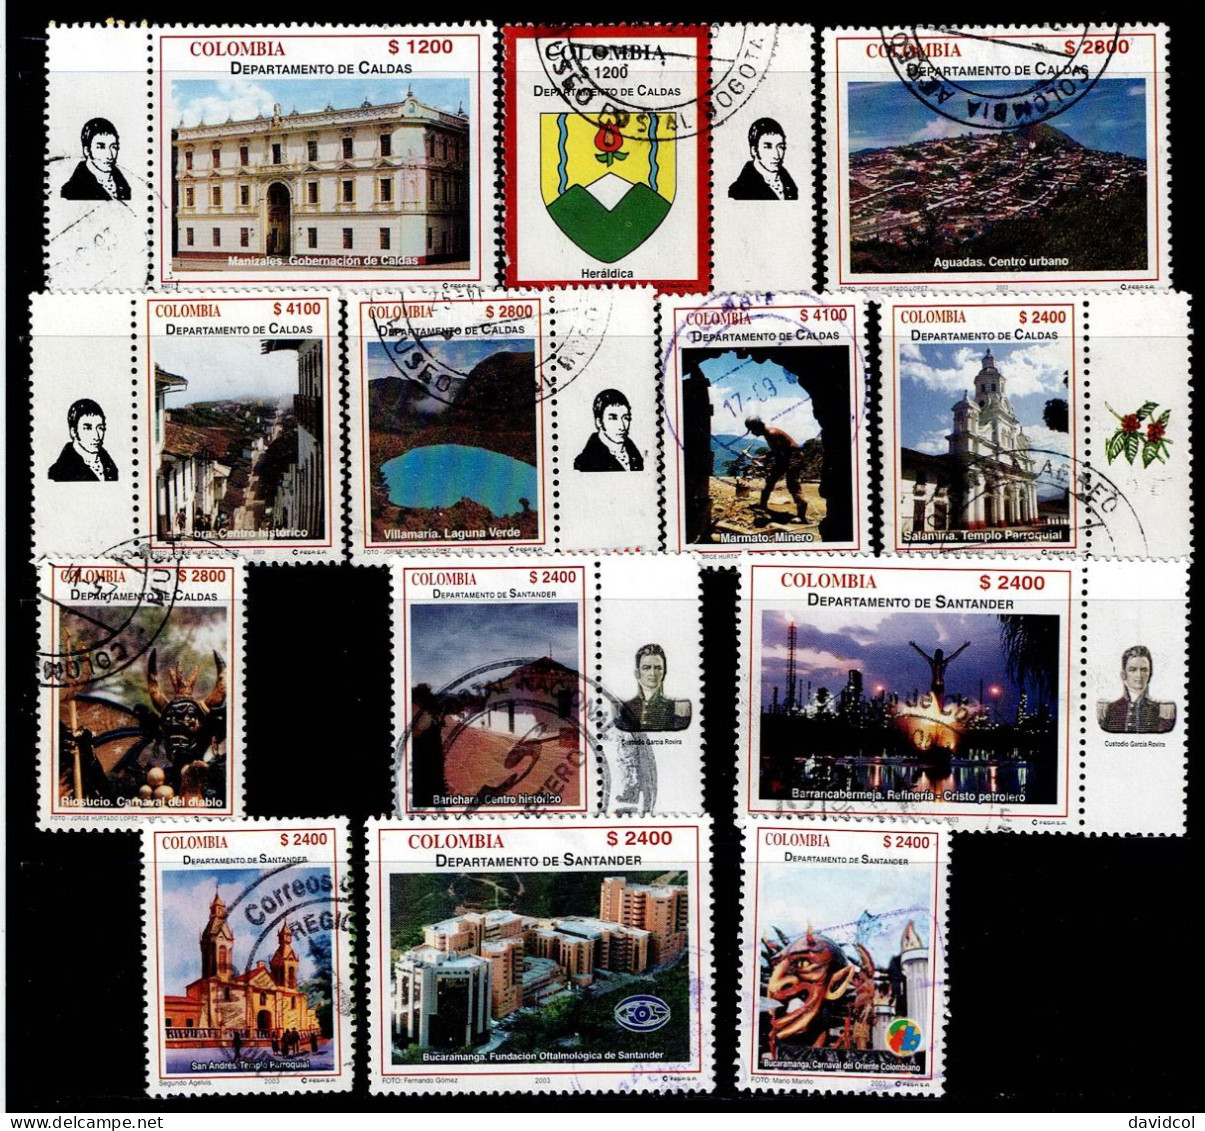 0005G-COLOMBIA-2003- USED STAMPS LOT - CALDAS AND SANTANDER DEPARTMENTS- NO COMPLETE SETS - Colombia